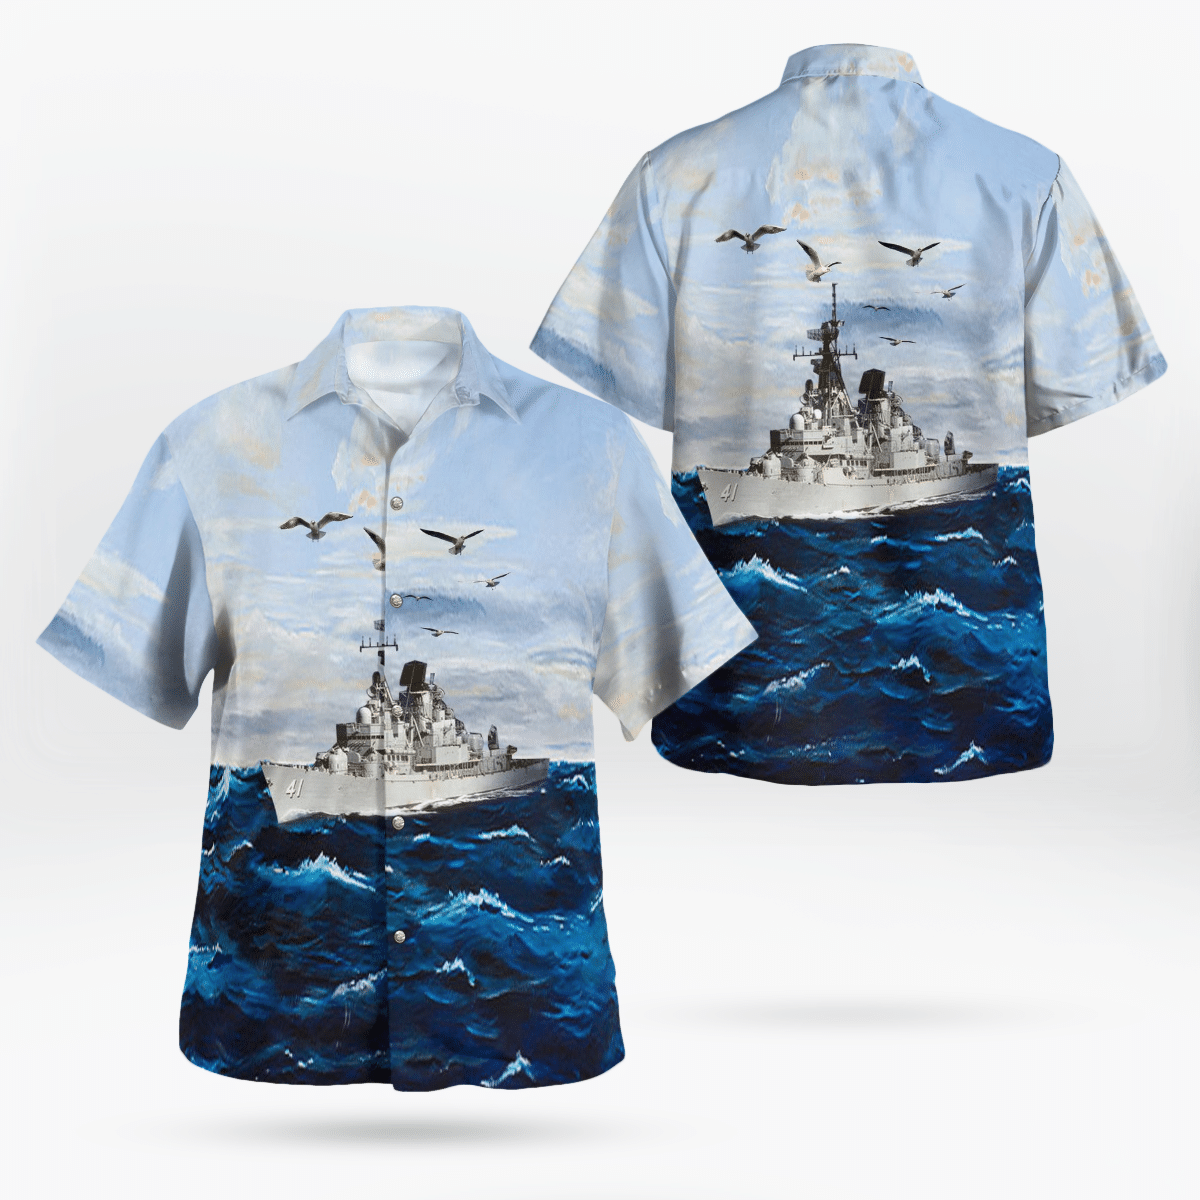 Consider getting these Hawaiian Shirt for your friends 57